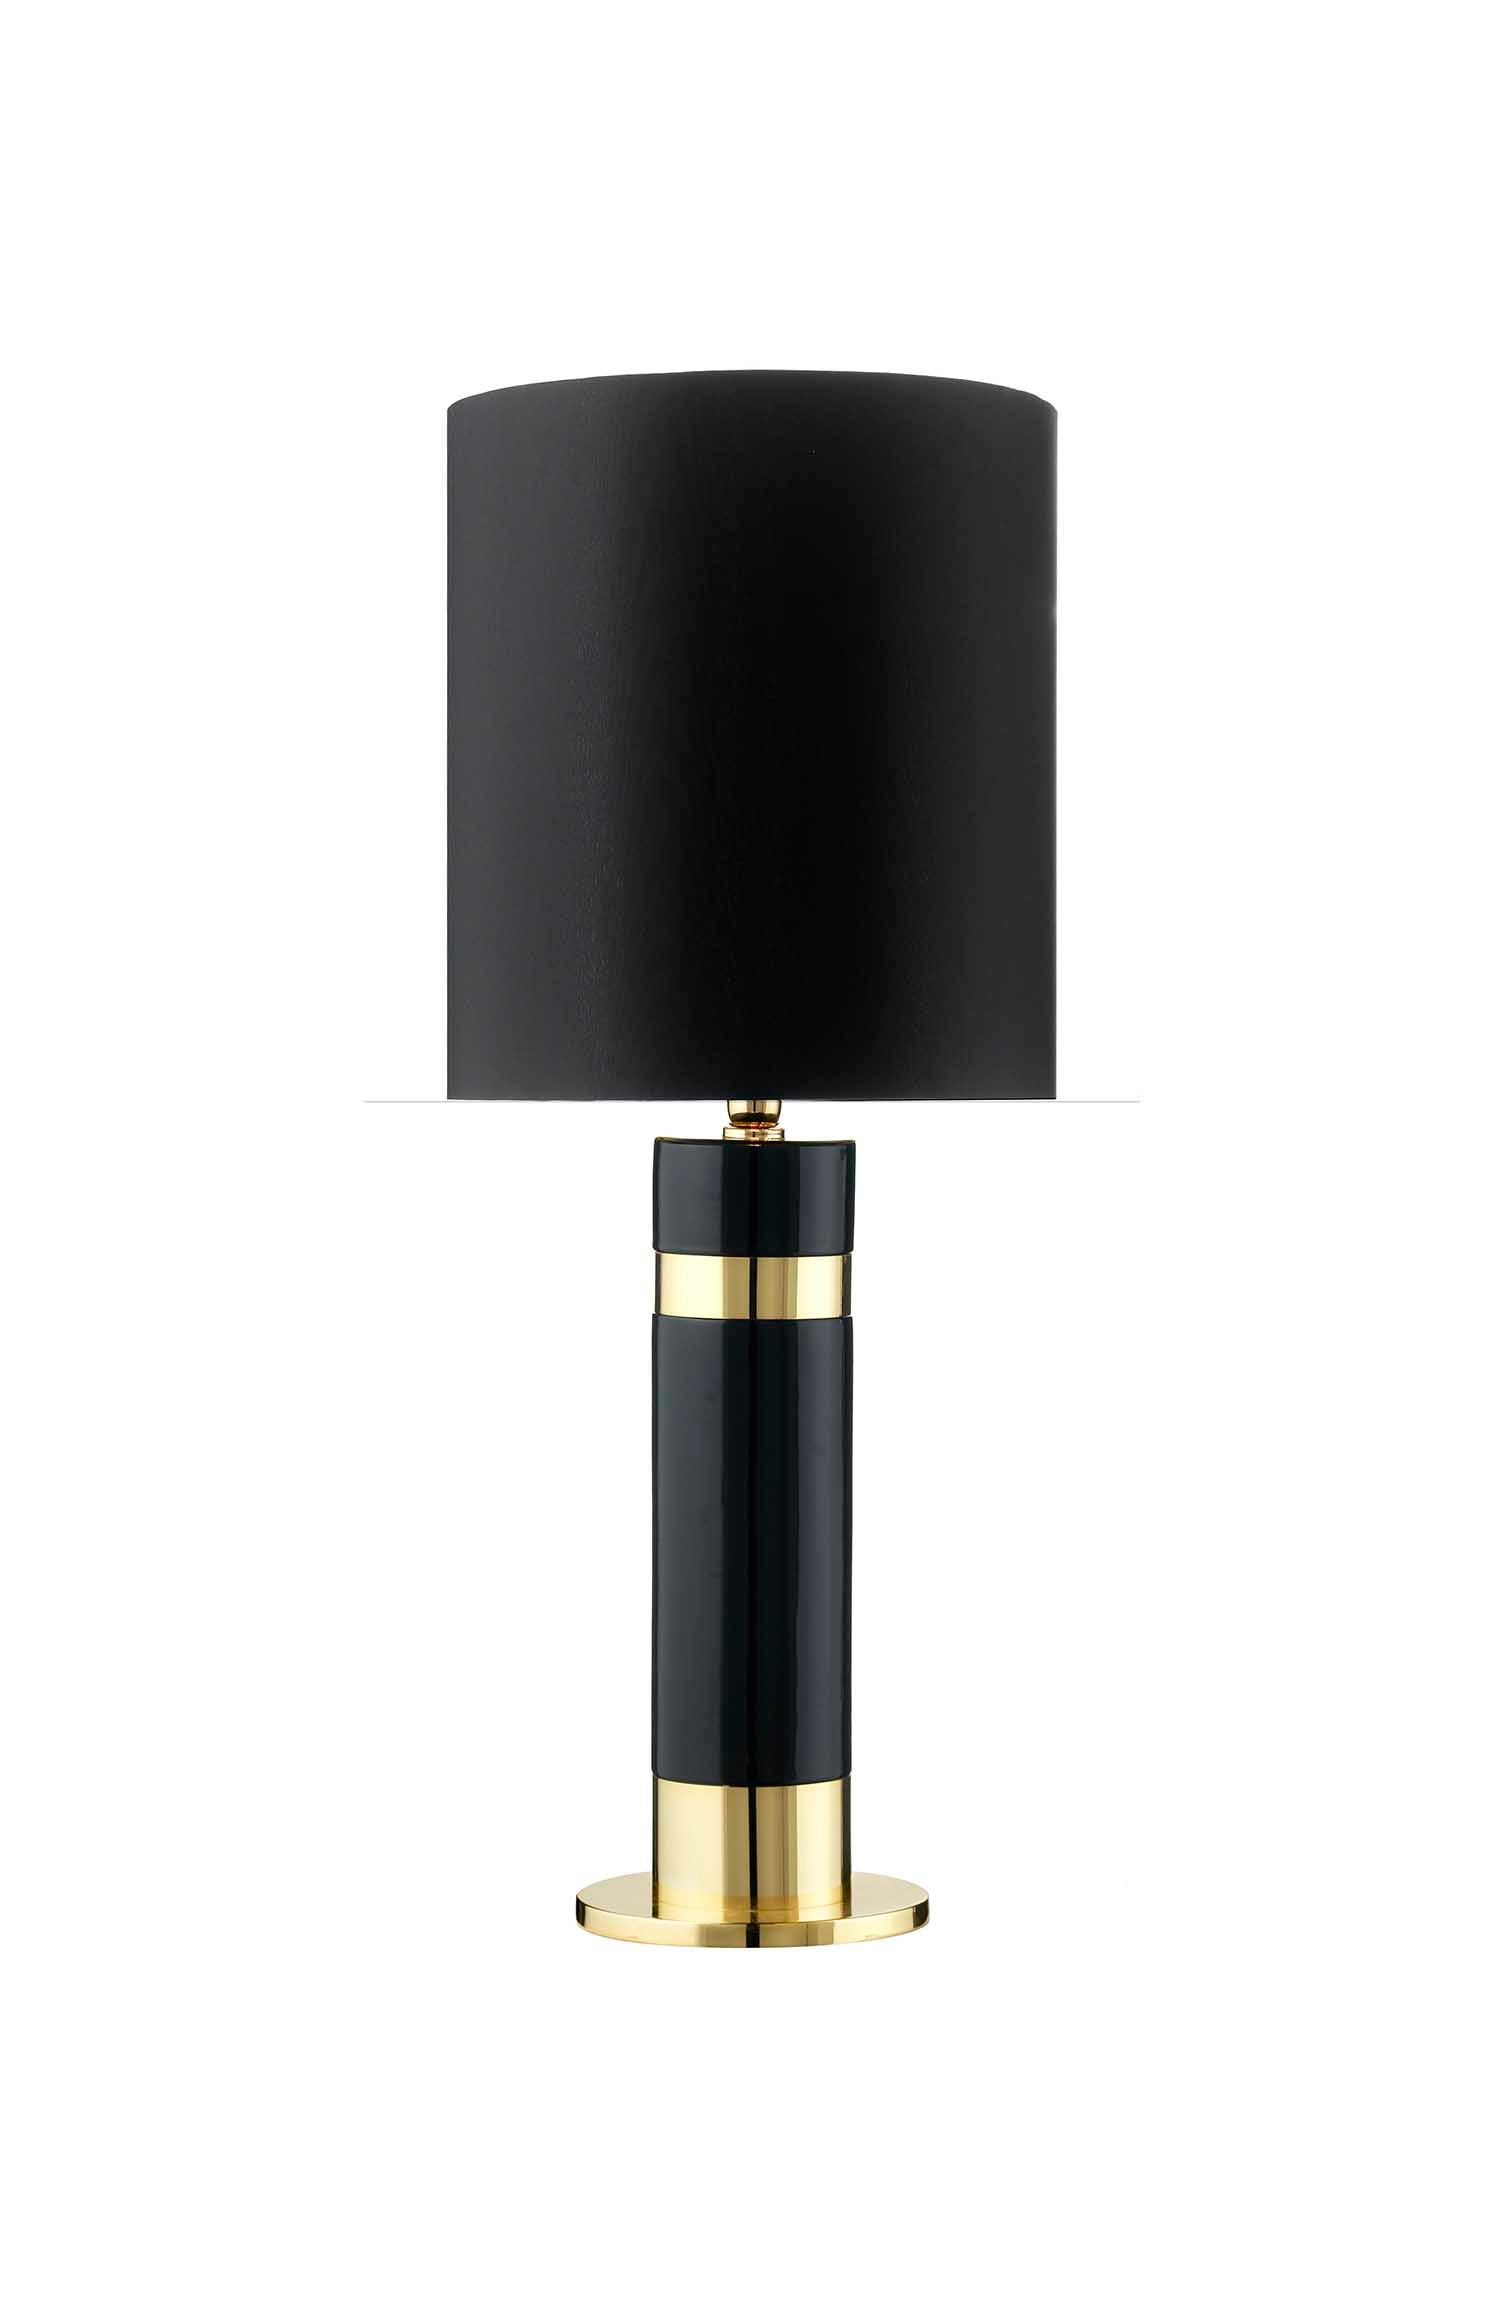 Ceramic table lamp HERMES 1 black enamel and 
24-Karat gold finished, with cotton lampshade.
cod. LHE001


Measures: 
Height 98.0 cm
Diameter 40.0 cm.
 